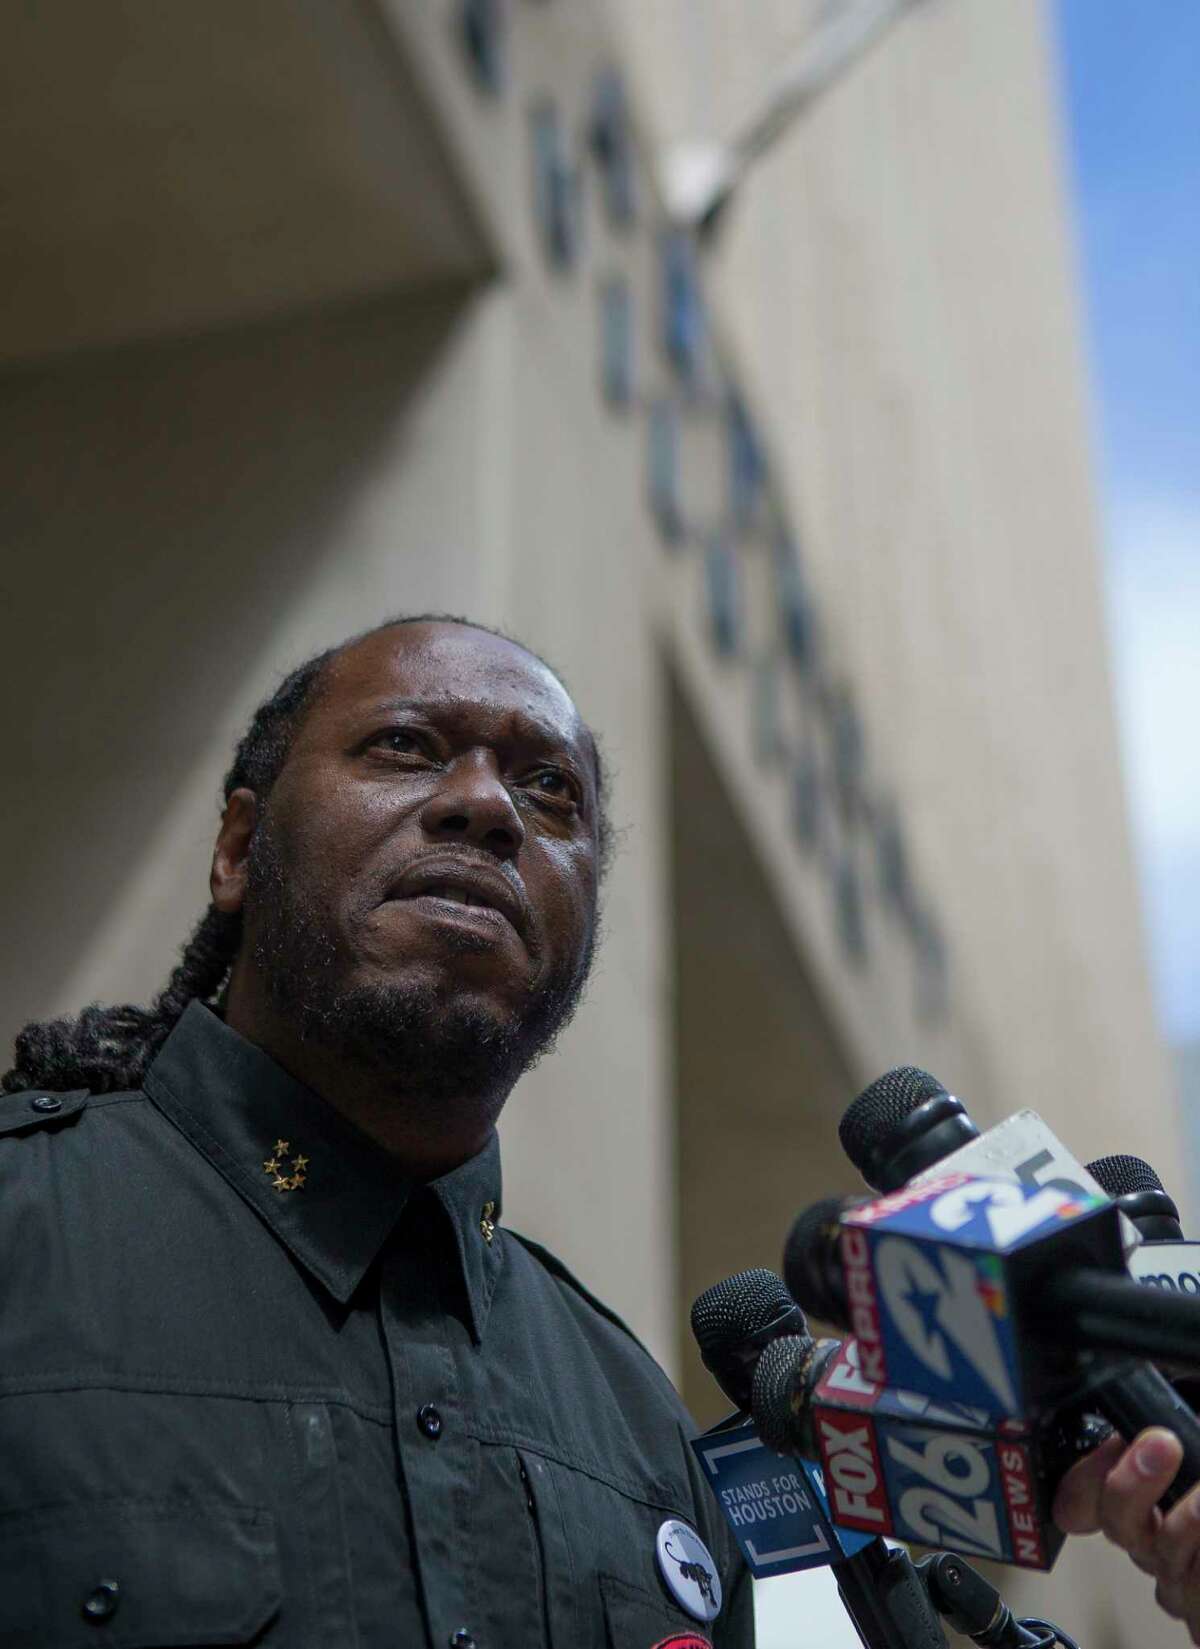 Yahcanon Ben Yah, with The People's New Black Panther Party, addresses the media in front of the Houston Police Department headquarters building in downtown Houston, Monday, Feb. 18, 2019. Activists said they were calling for police accountability and a murder charge the narcotics agent accused of fabricating evidence used to justify a no-knock raid that left two civilians dead.